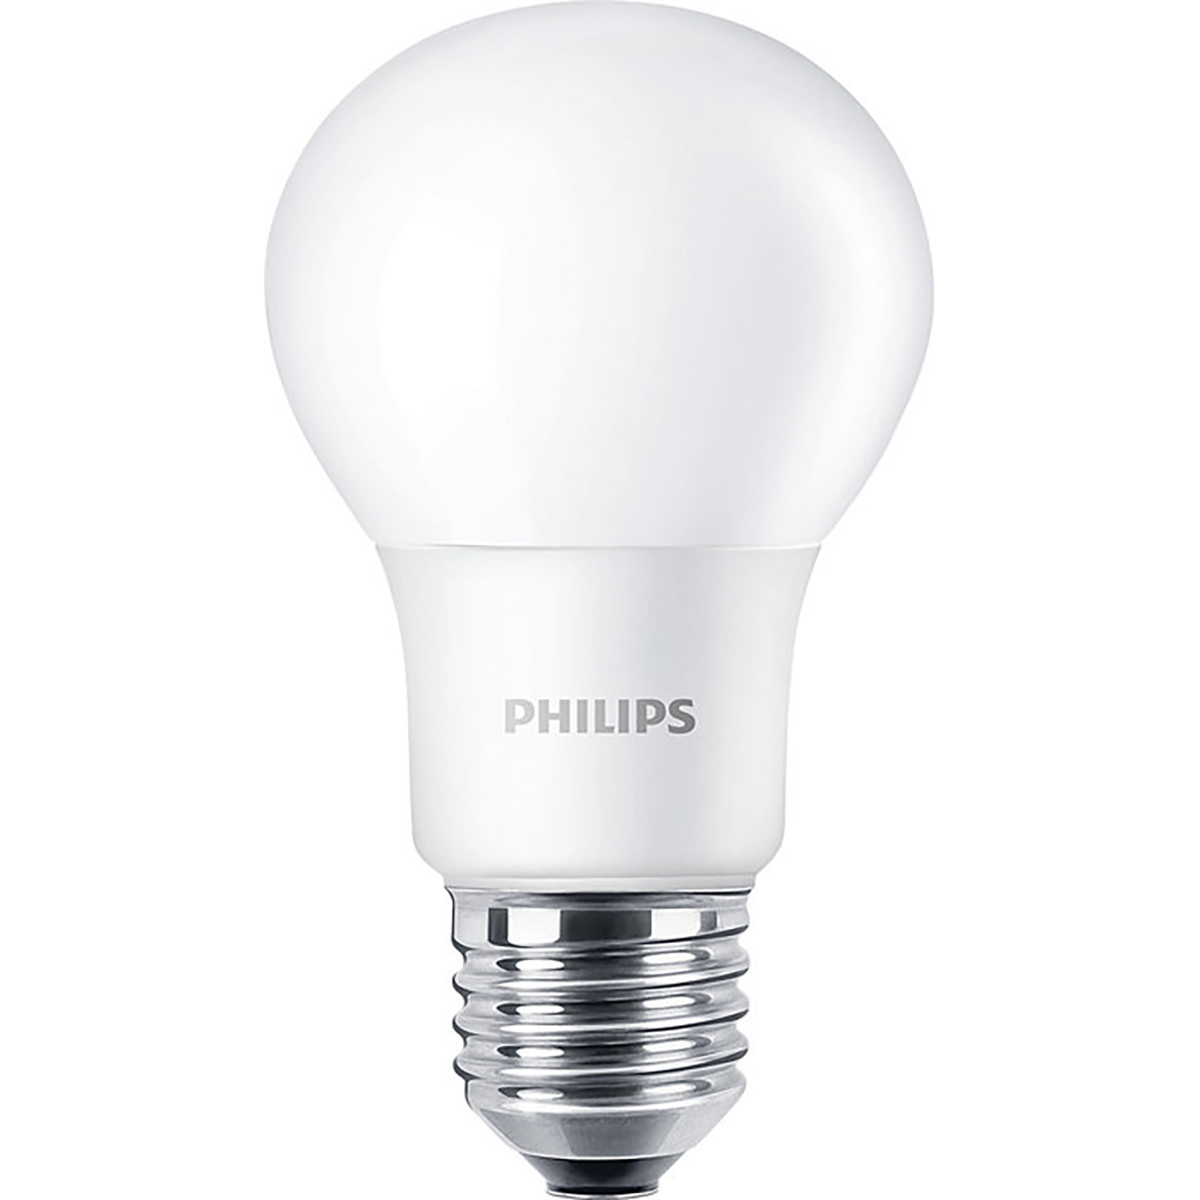 Philips standaardlamp LED mat 8W (vervangt 60W) grote fitting E27